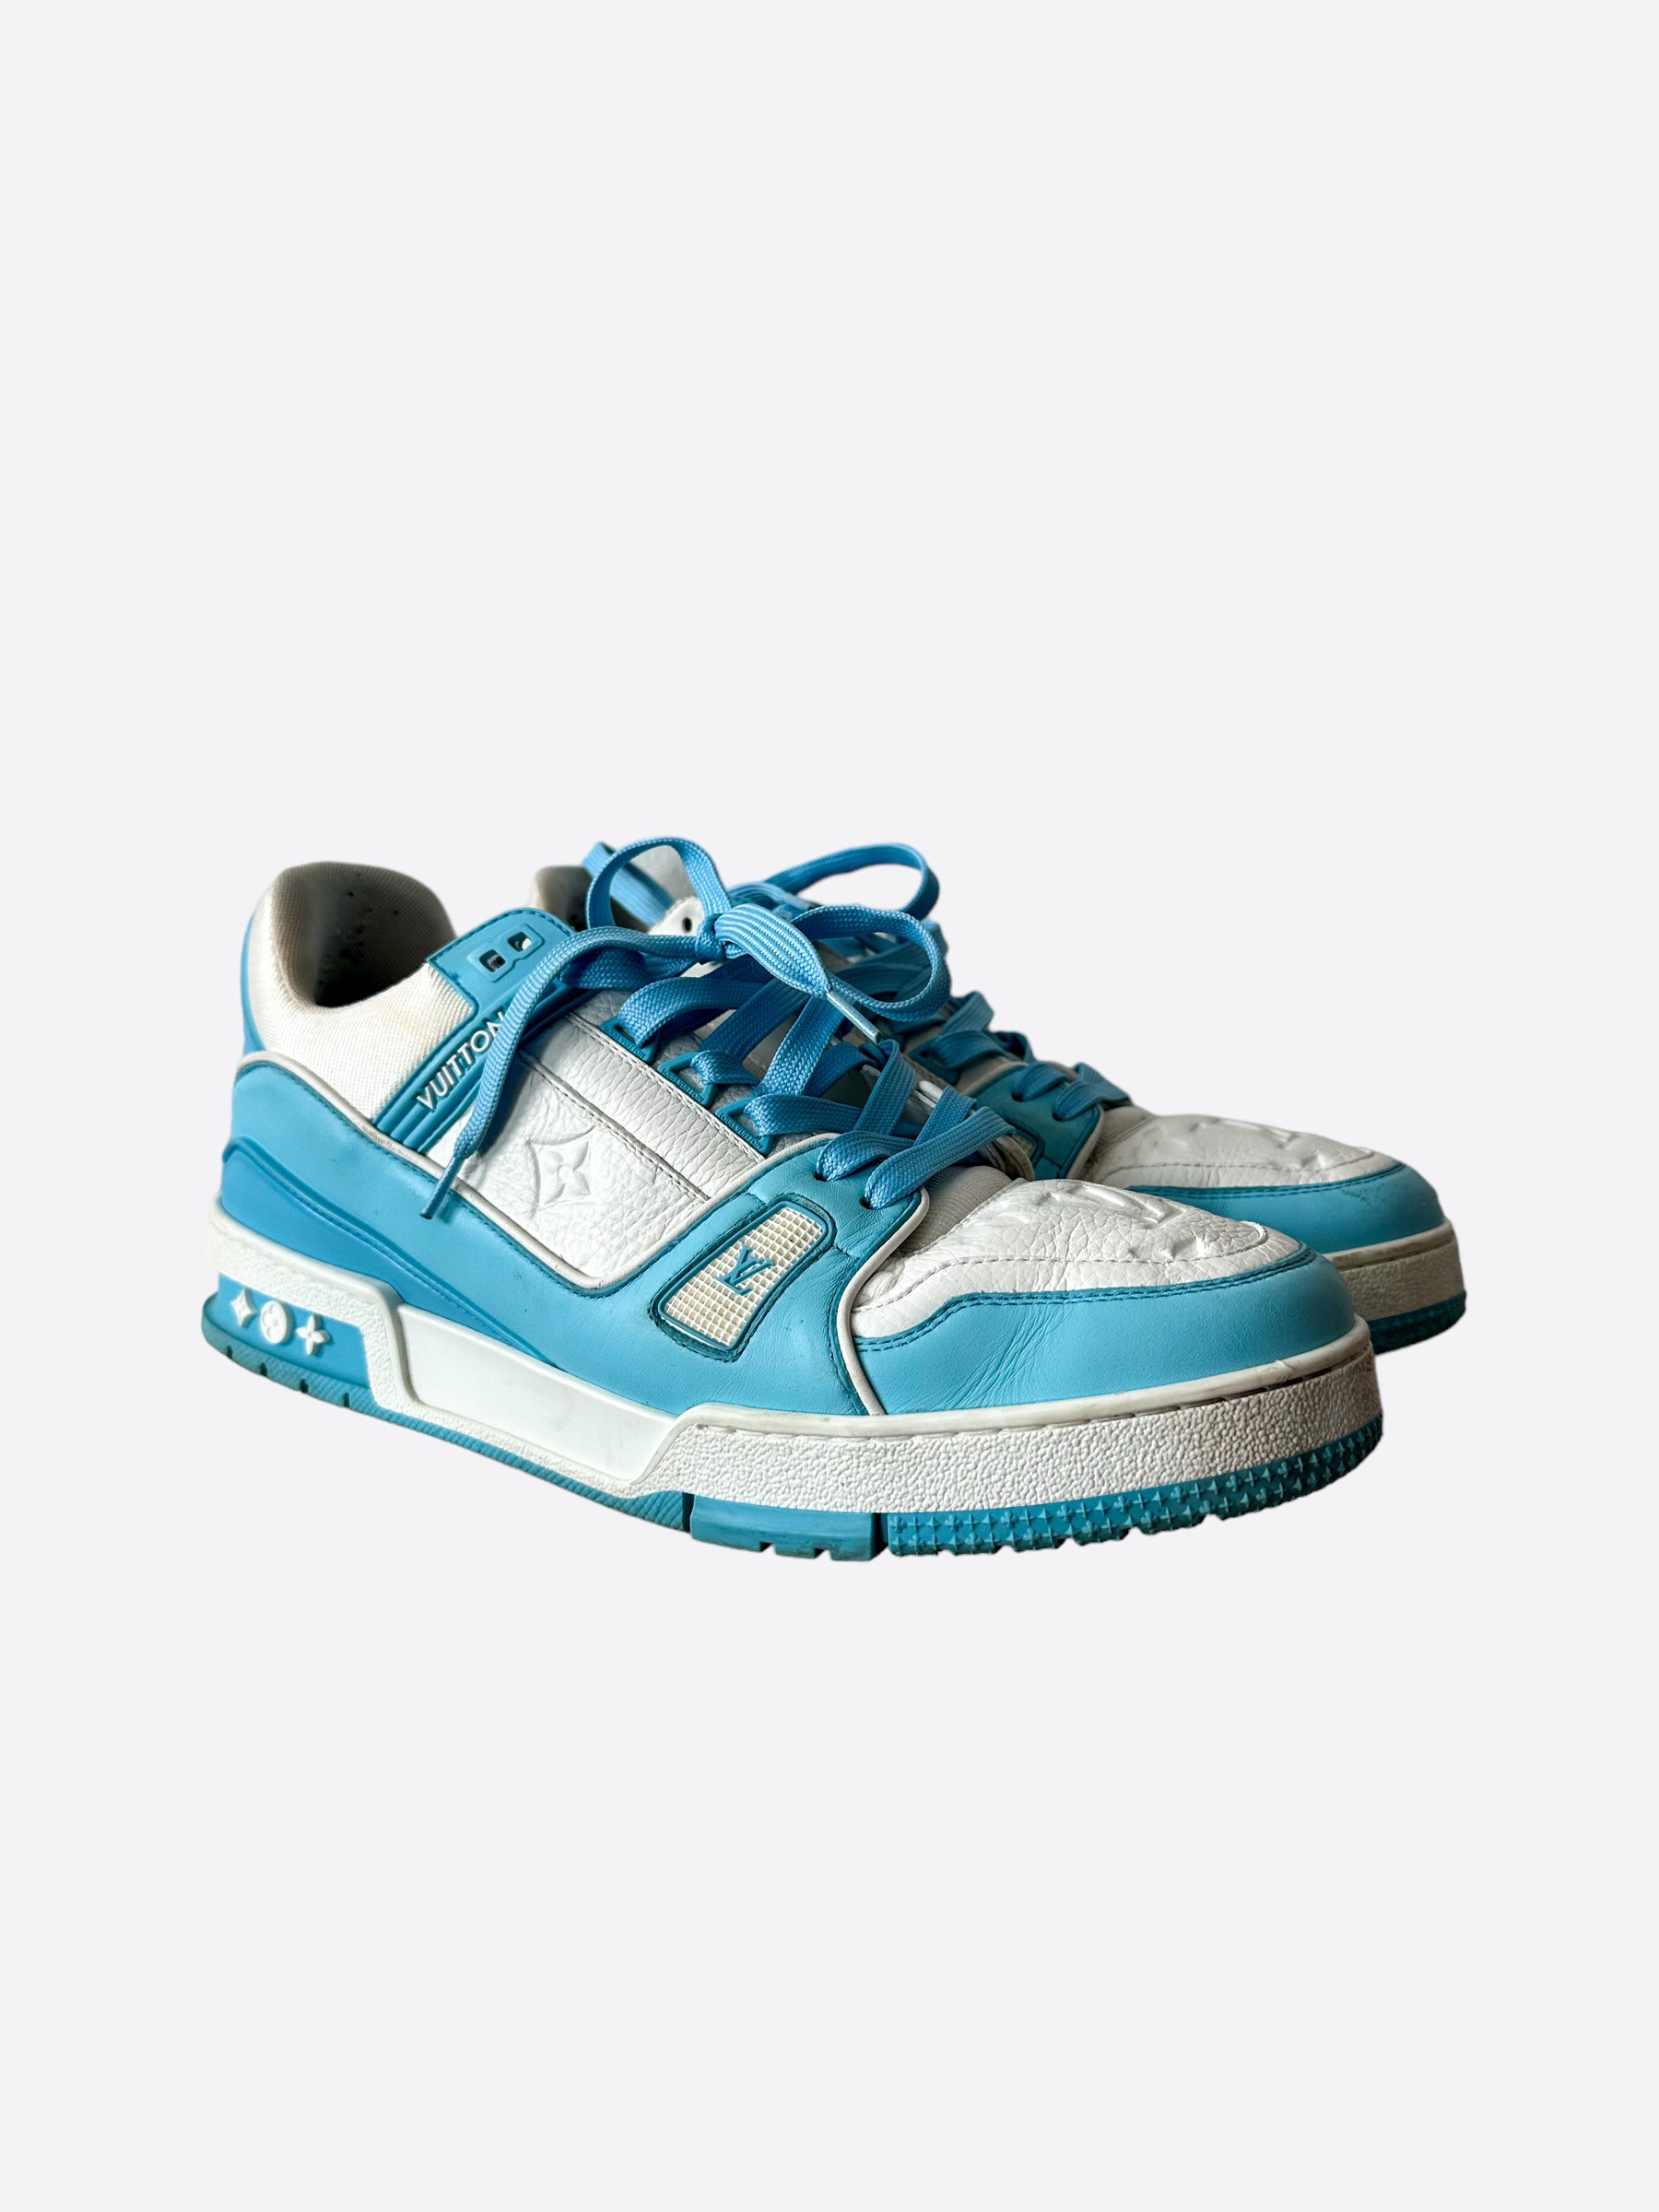 blue and white louis vuitton trainers